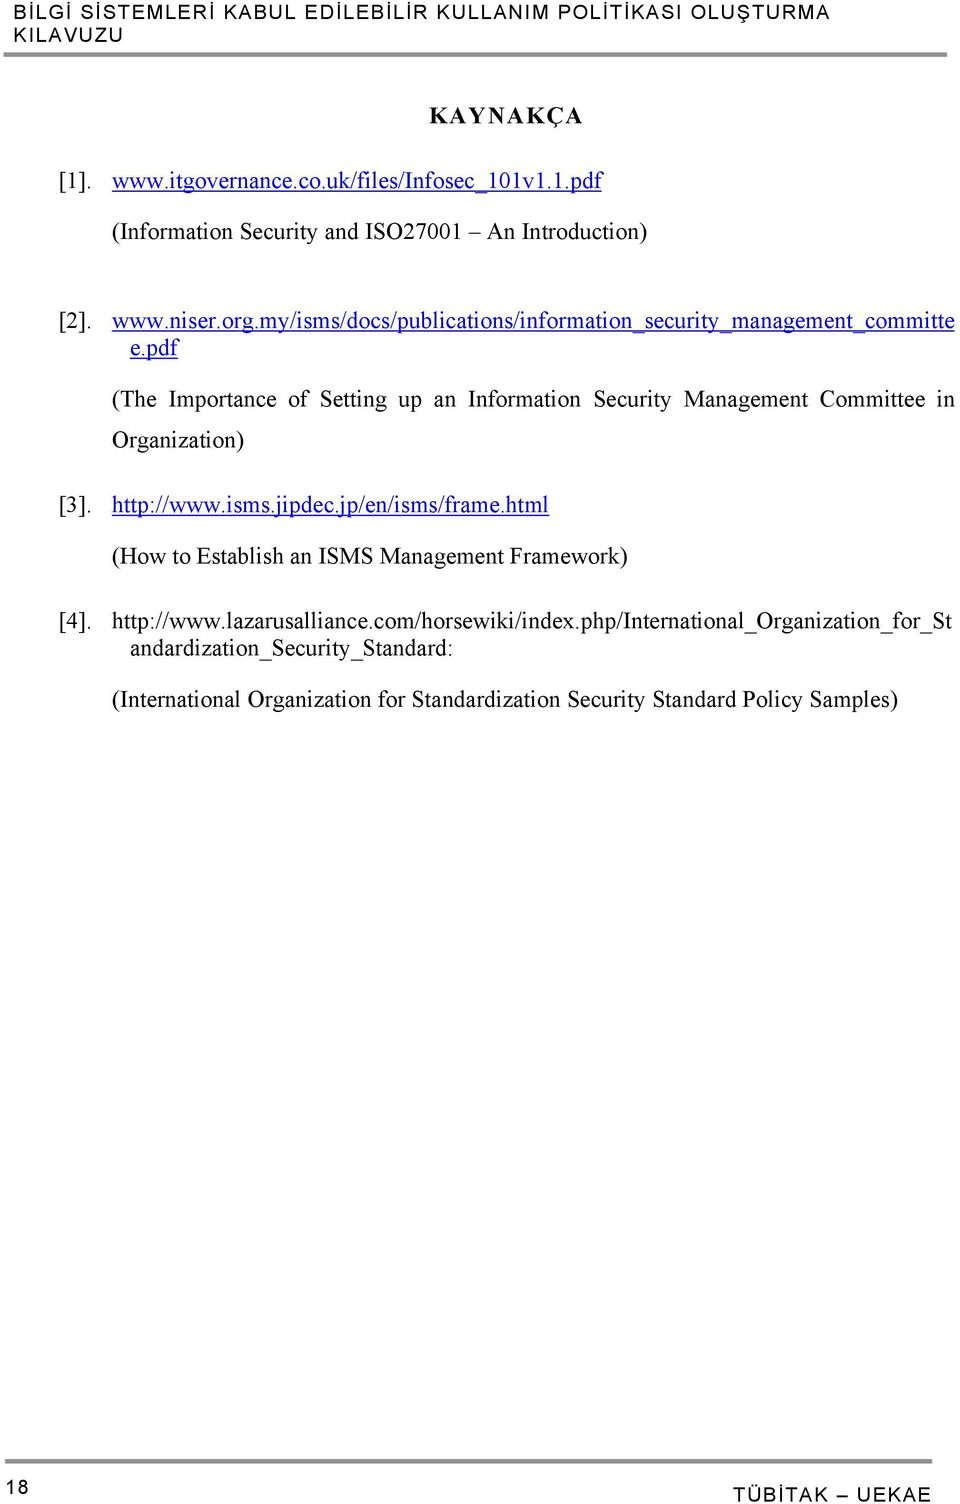 pdf (The Importance of Setting up an Information Security Management Committee in Organization) [3]. http://www.isms.jipdec.jp/en/isms/frame.